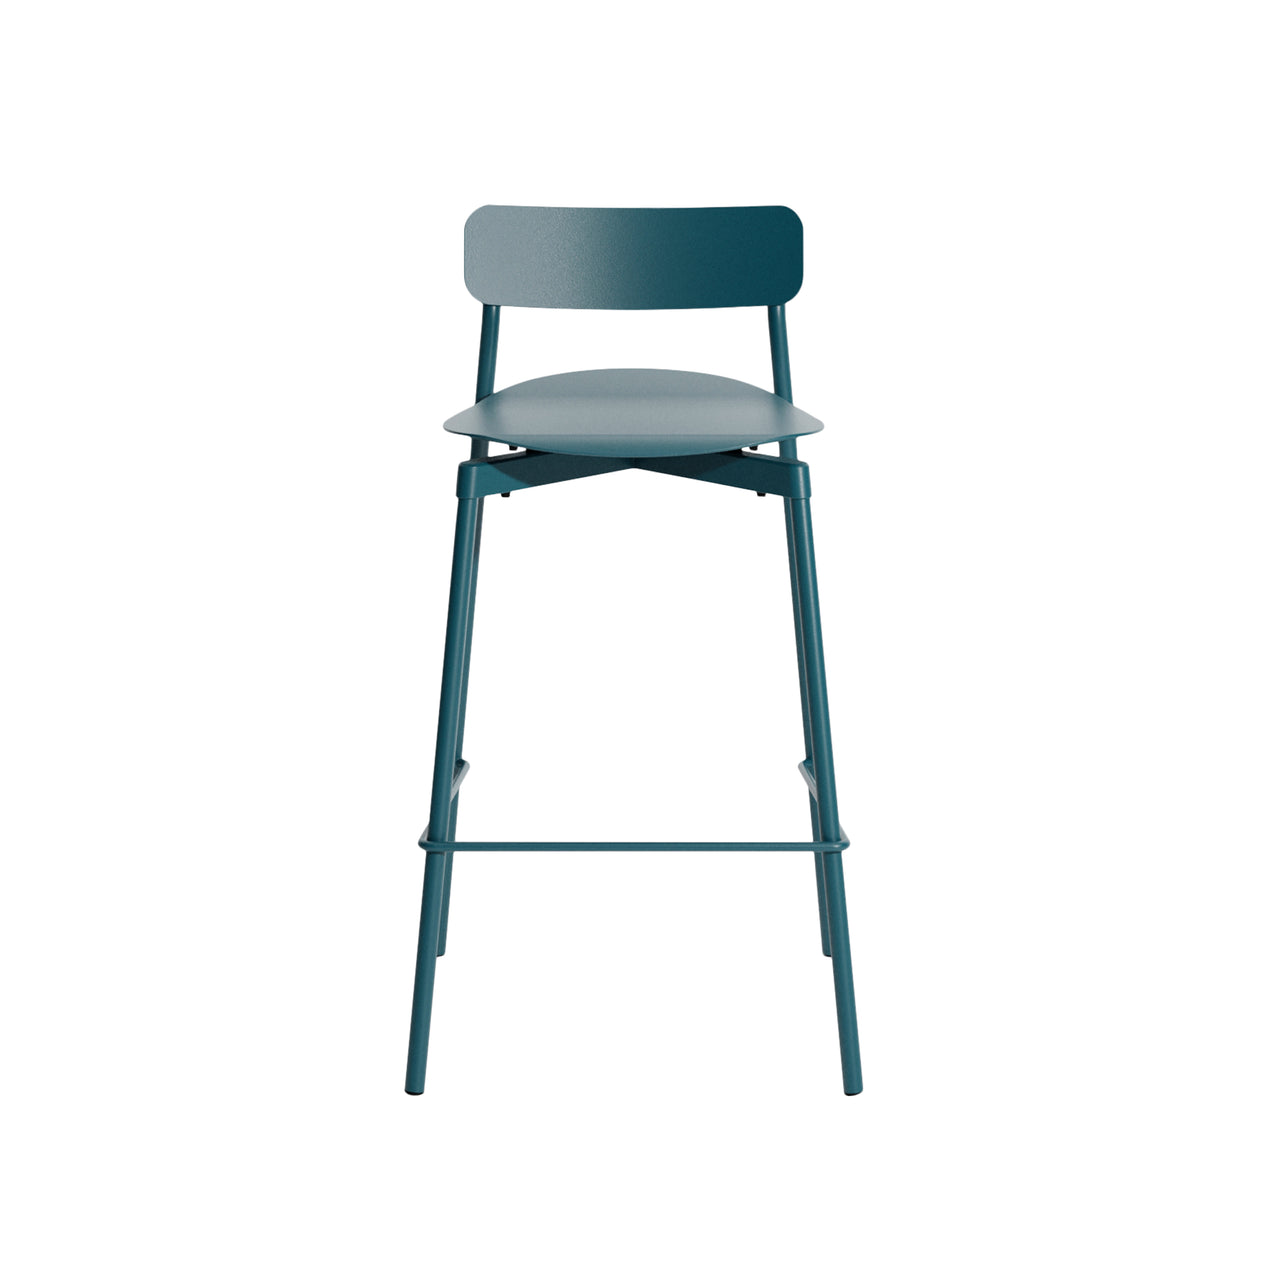 Fromme Stacking Bar + Counter Stool: Counter + Ocean Blue